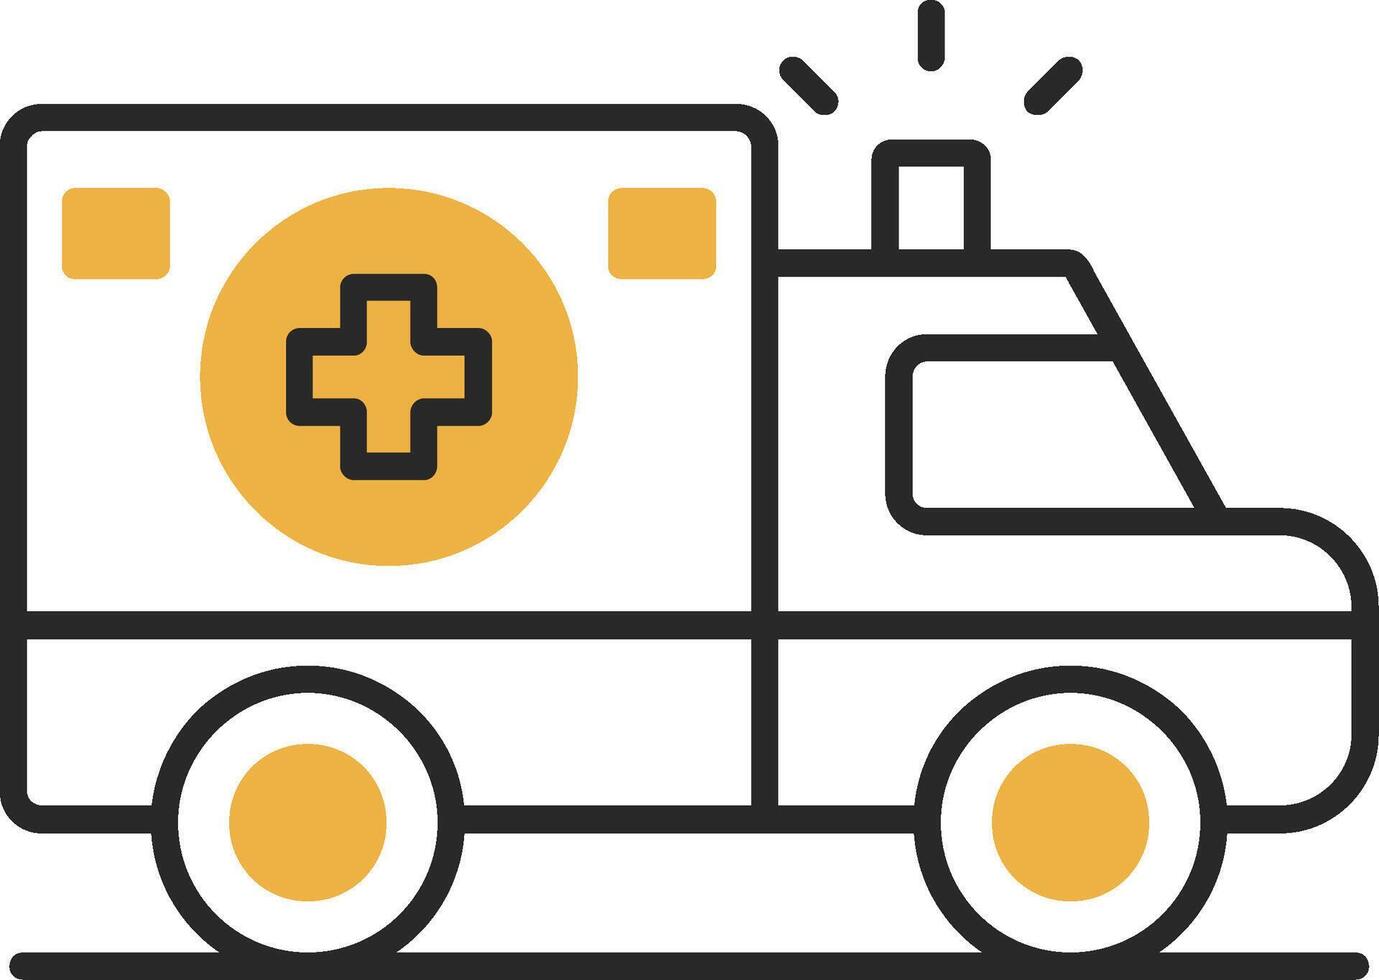 Ambulance Skined Filled Icon vector